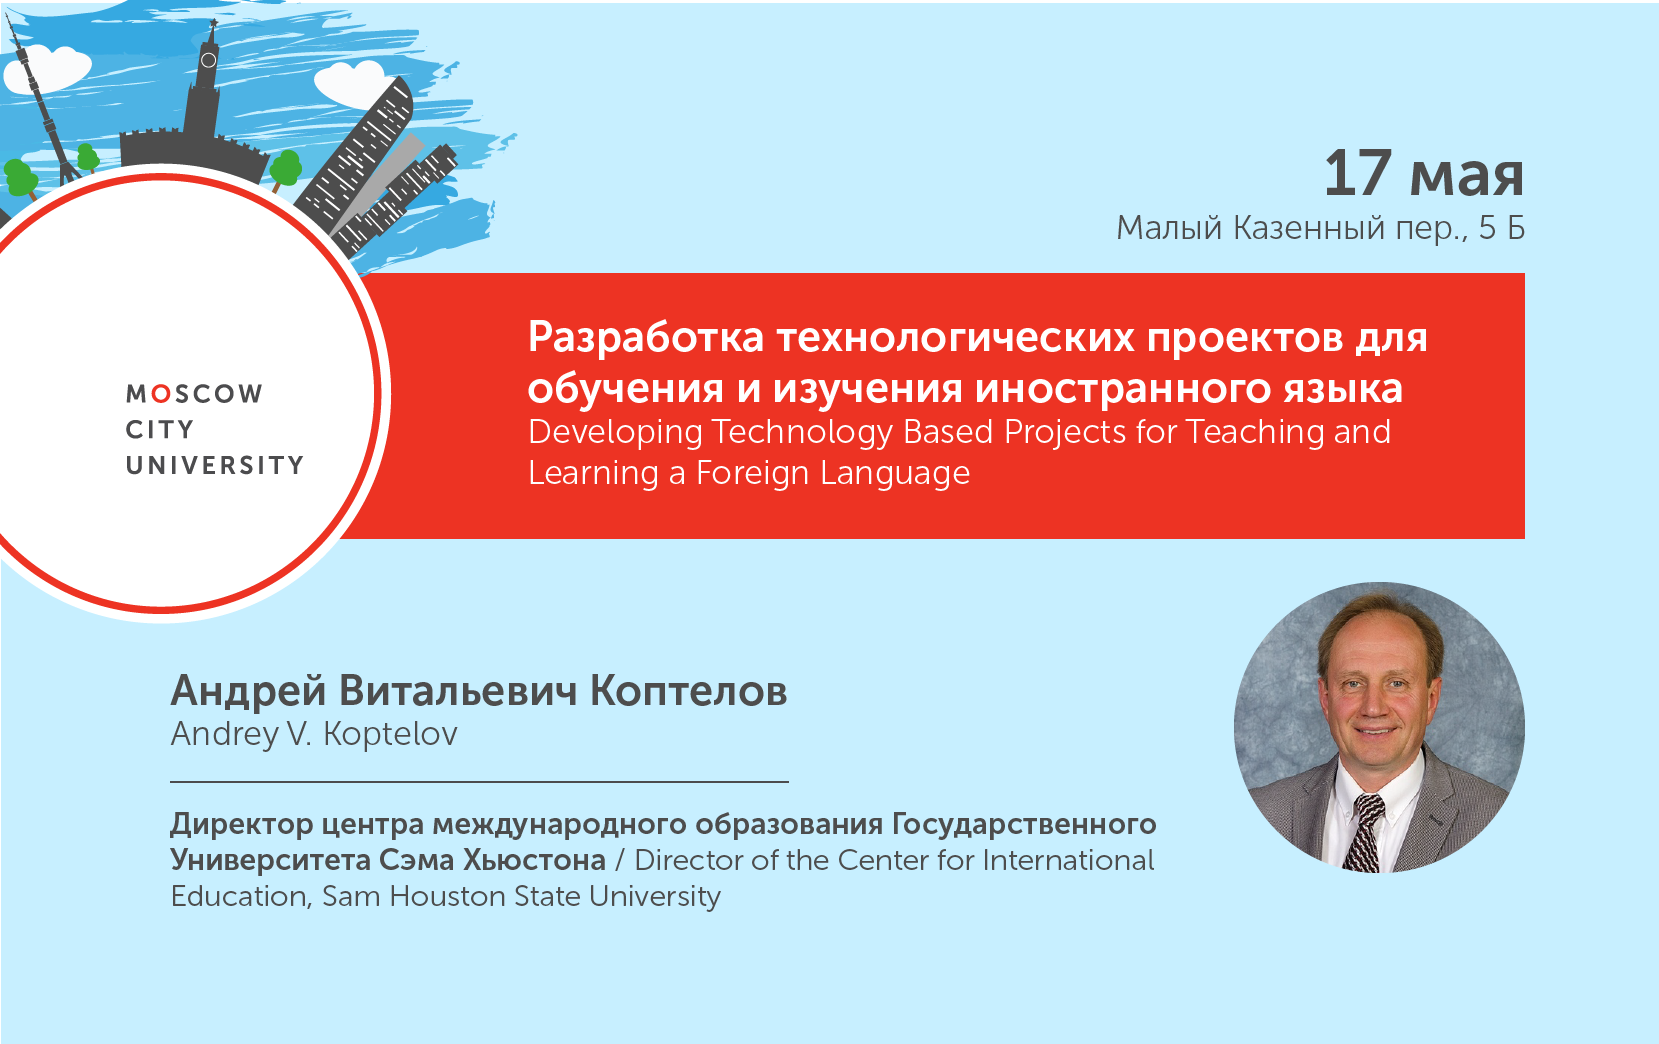 Andrey Koptelov on new technologies of learning foreign languages